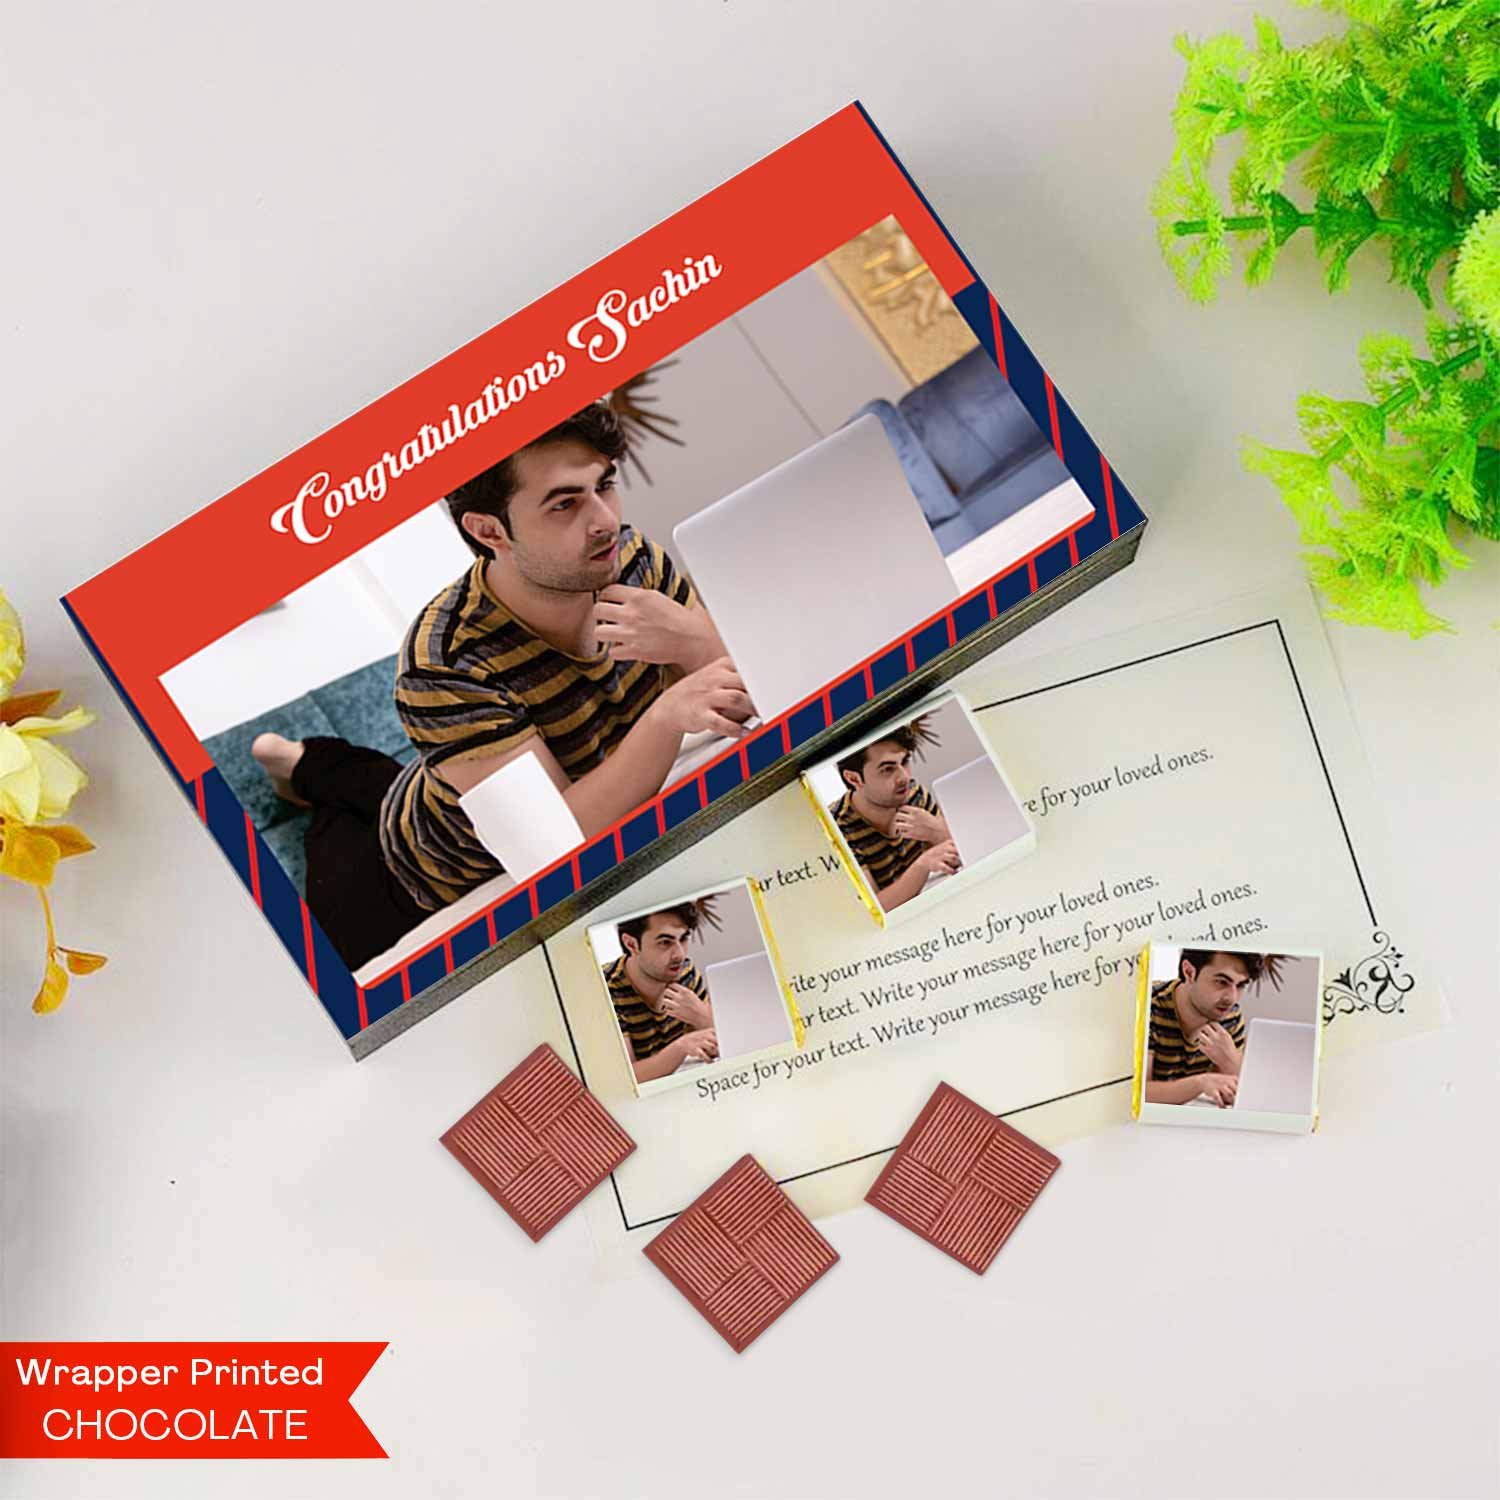 personalised chocolates  personalized chocolate gift box personalised chocolates with names customized chocolate box near me personalised chocolates with photo customized chocolate box india personalized chocolate gifts customized chocolate wrappers